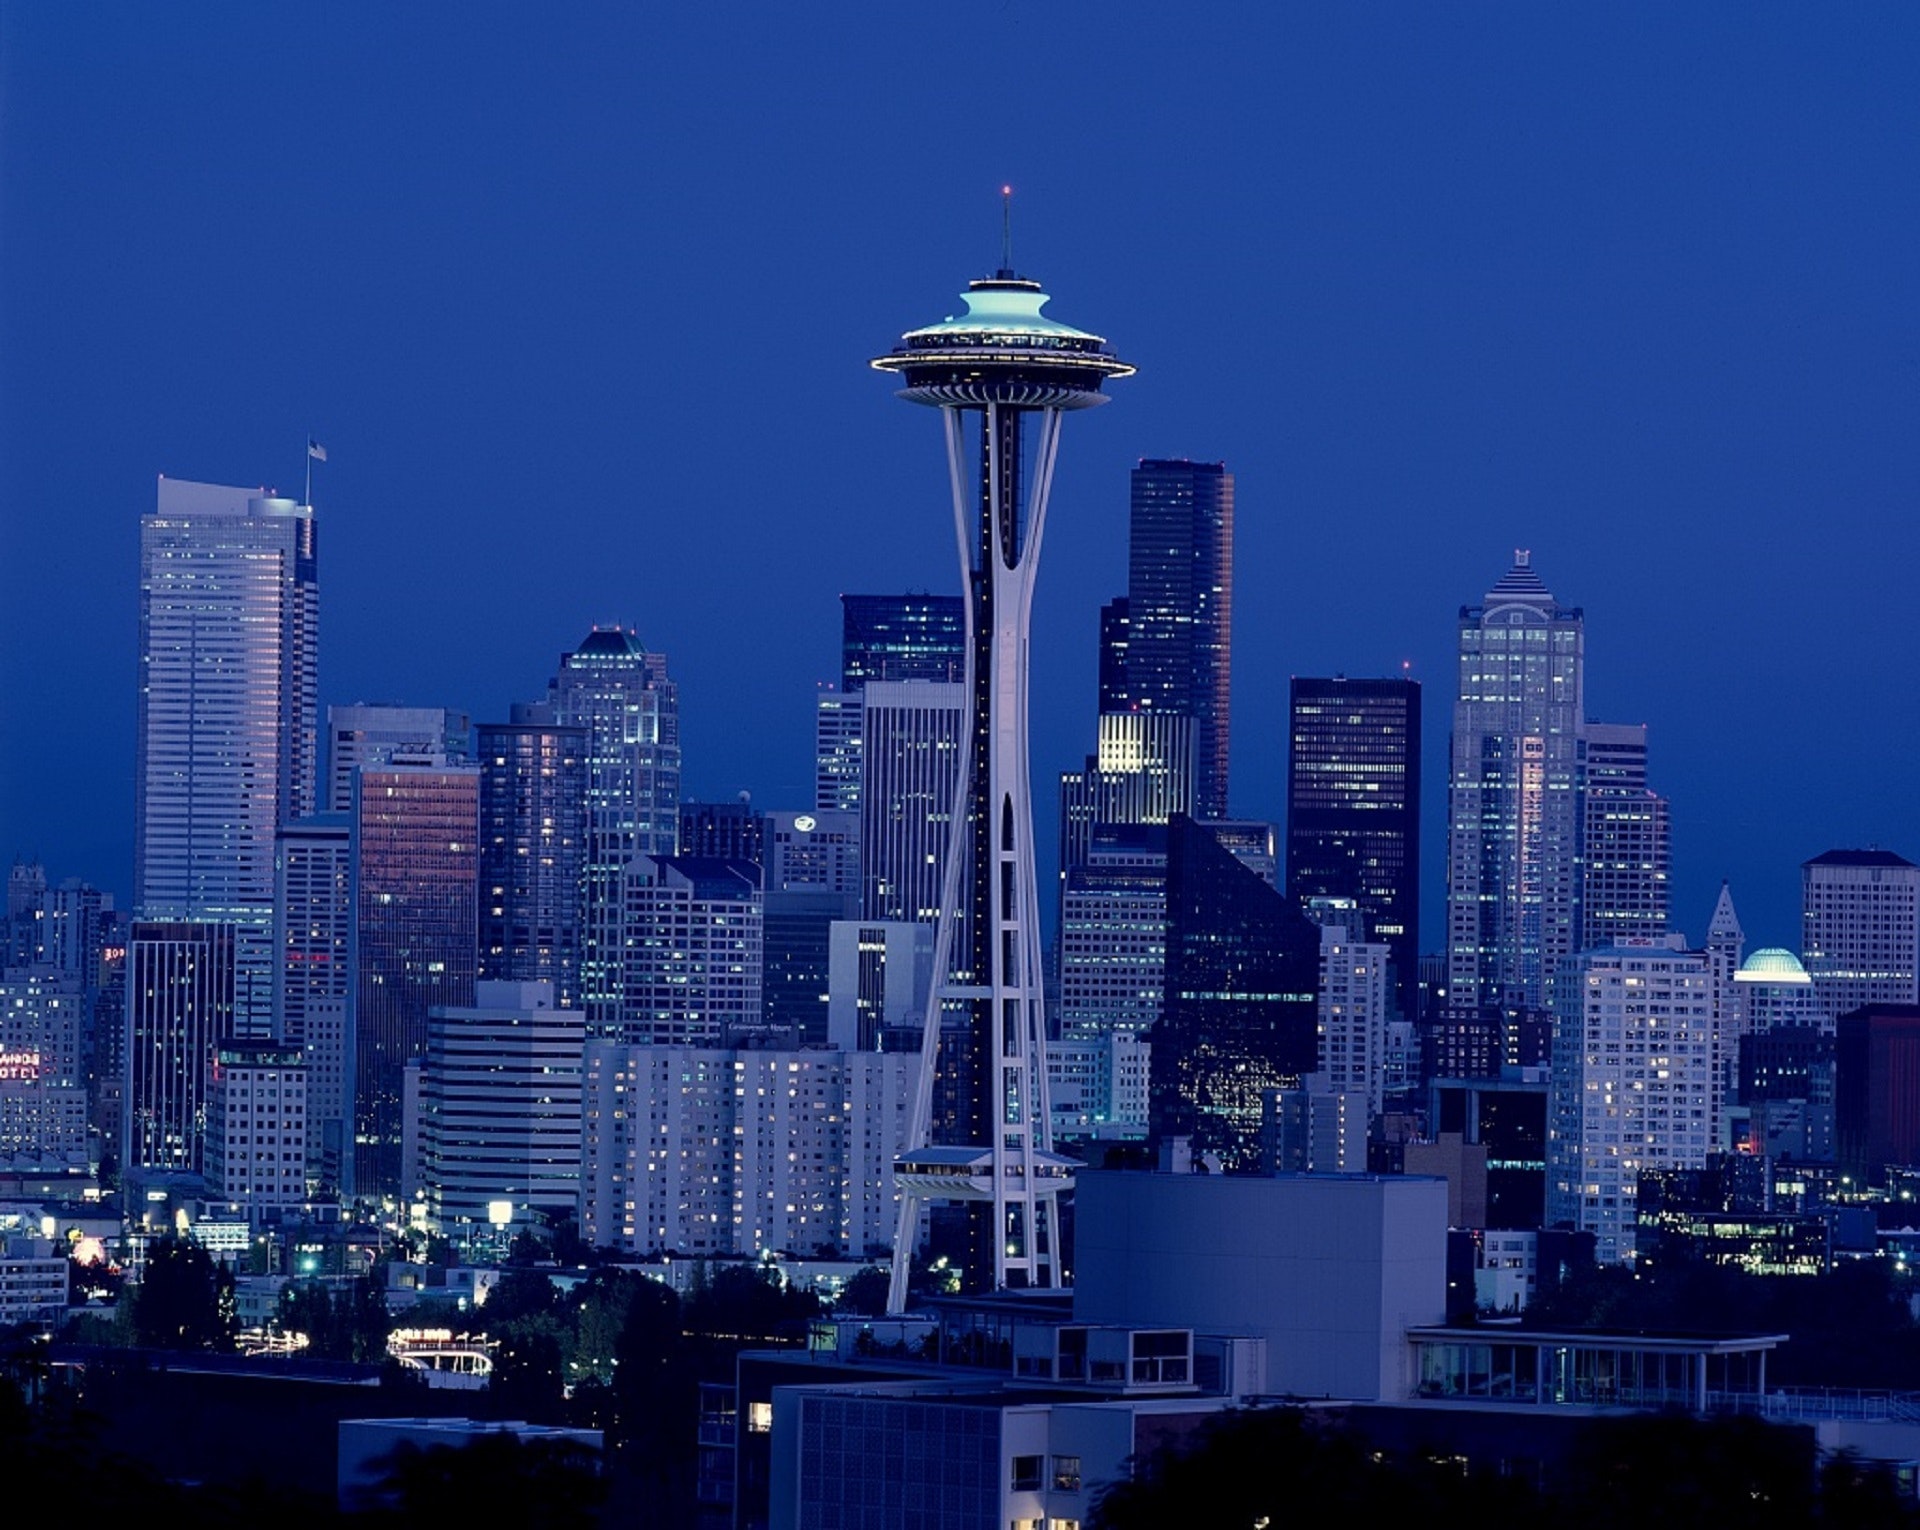 Space Needle Photo, Architecture, Seattle, Tower, Skyscrapers, HQ Photo